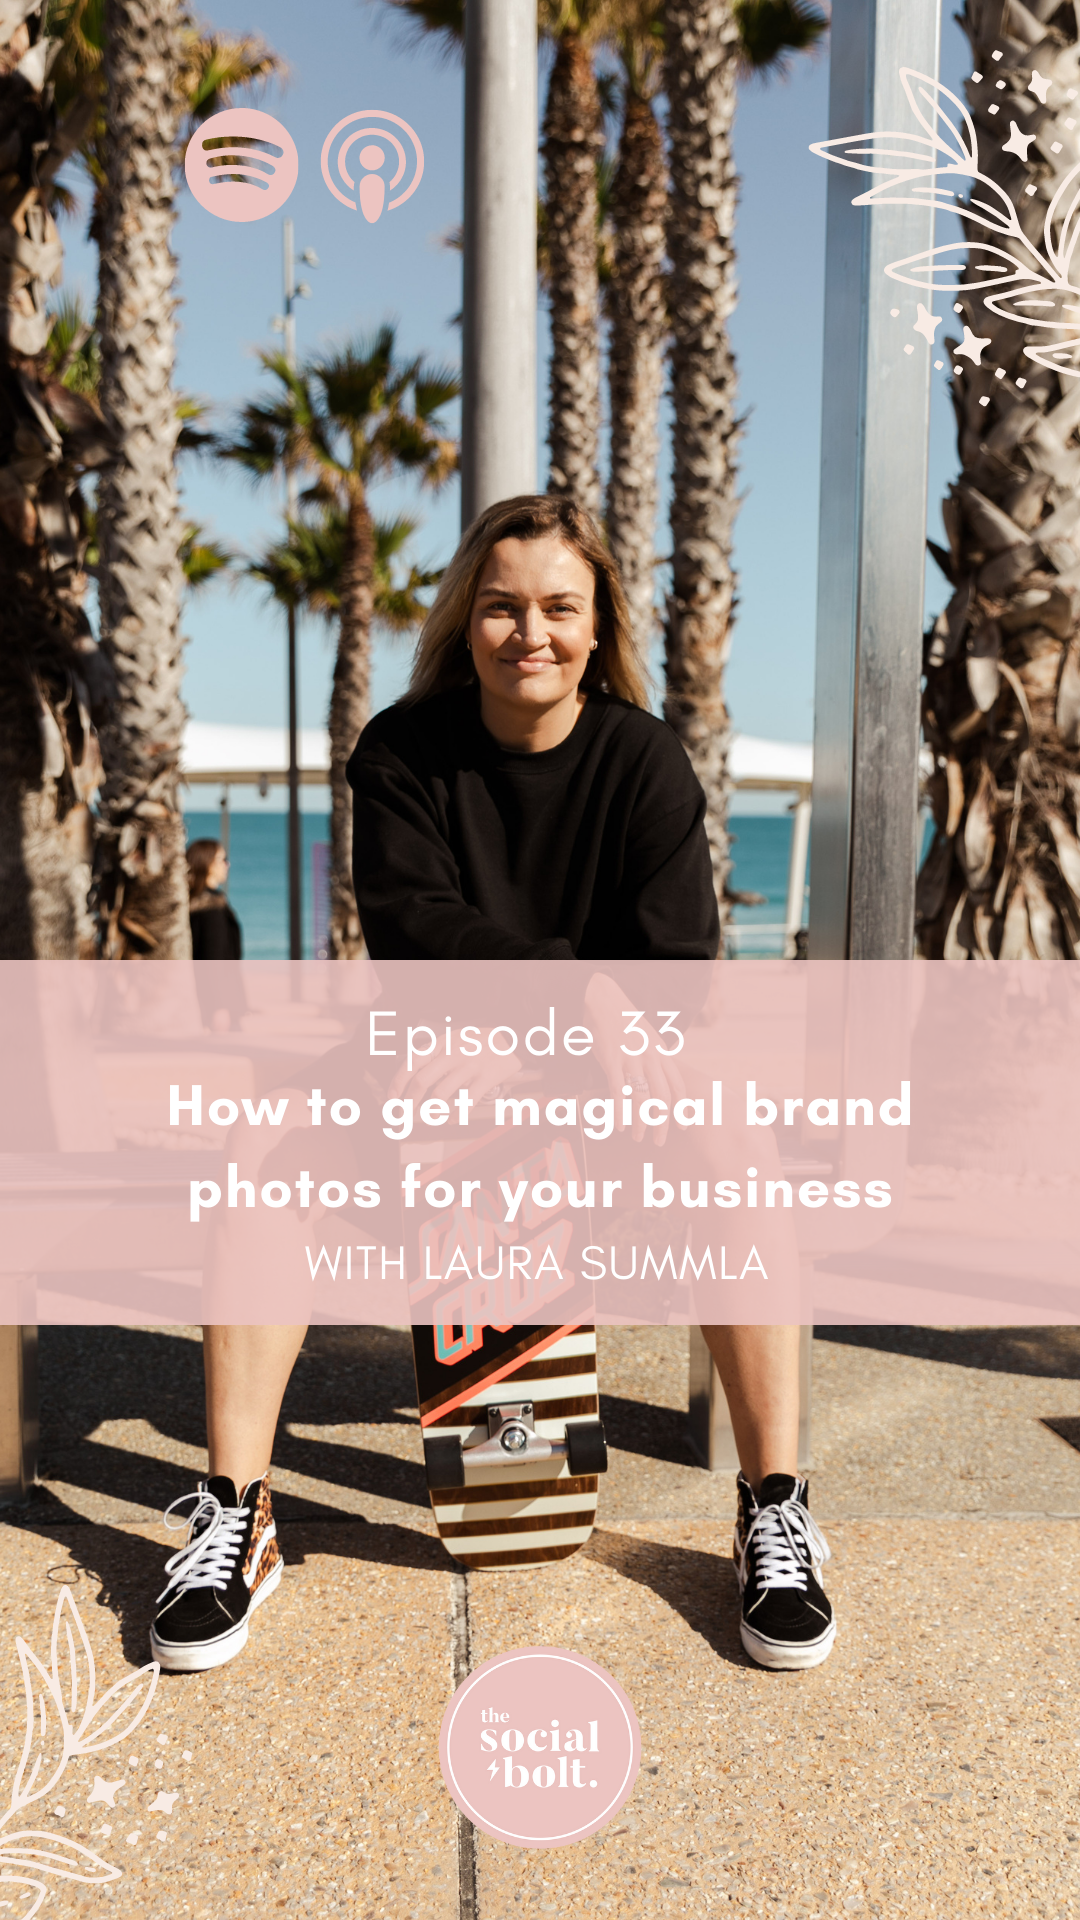 How to get magical brand photos for your business